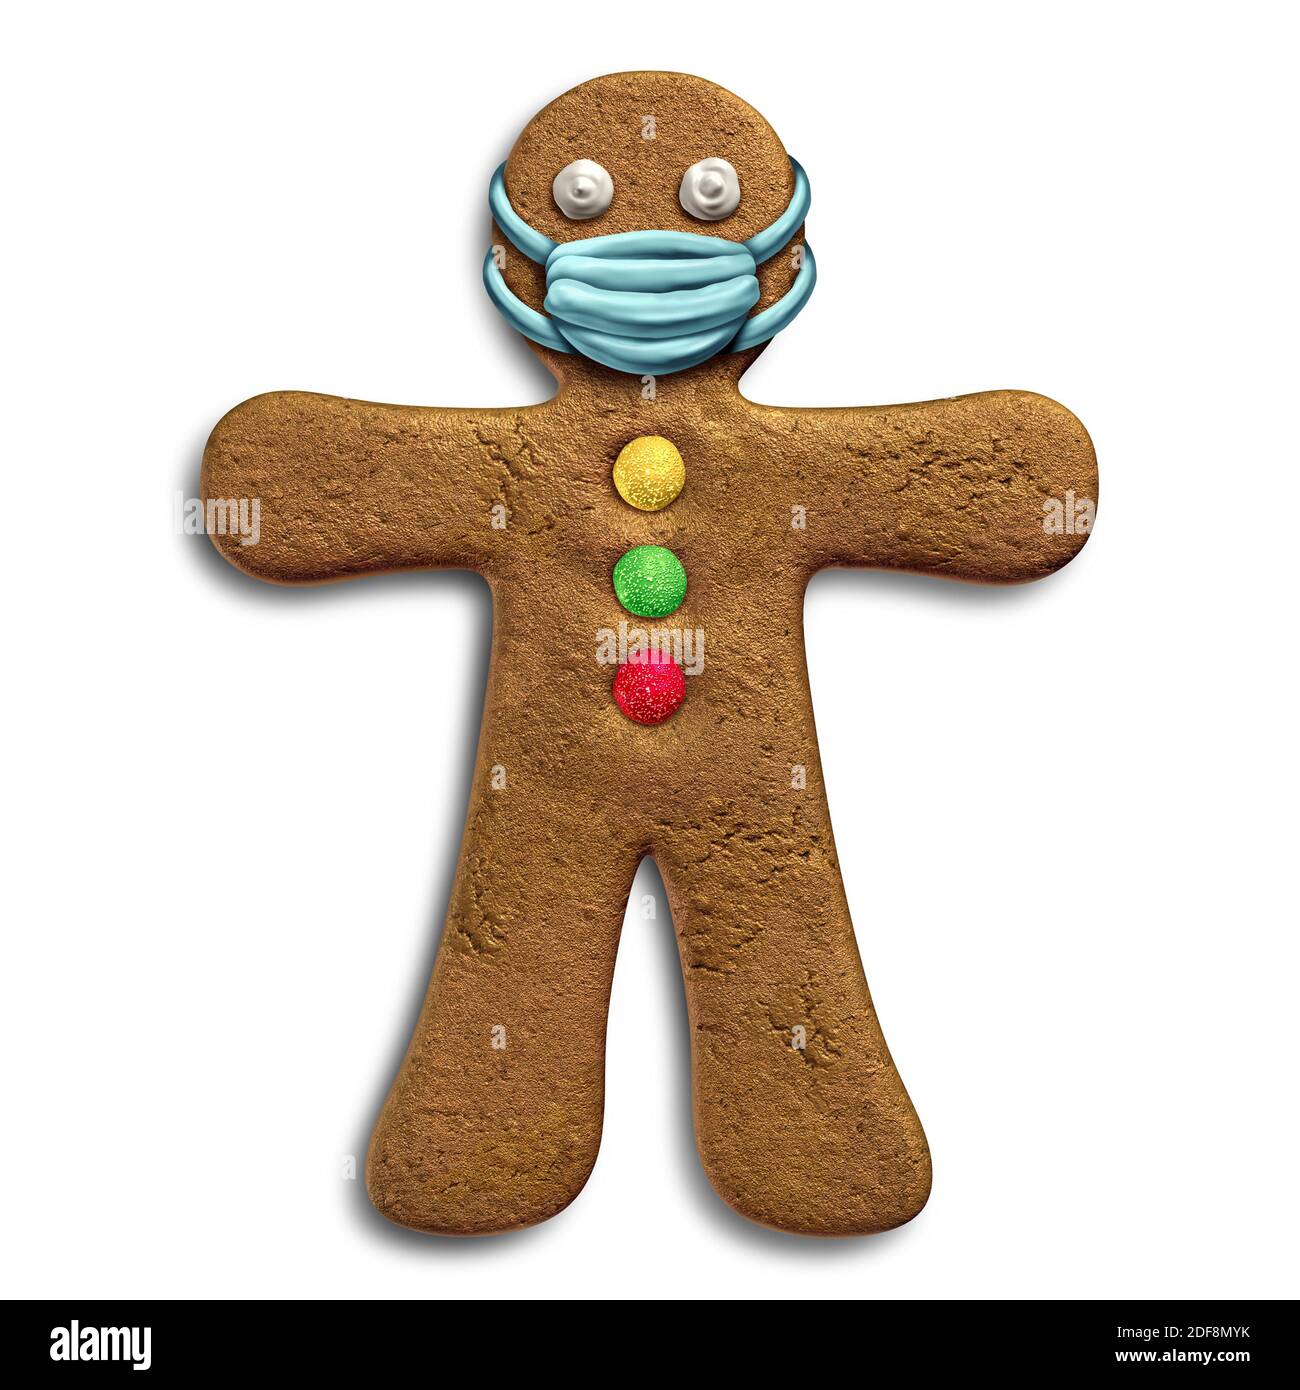 Gingerbread man with a face mask concept as a Christmas holiday season symbol for health and healthcare disease prevention and preventing a virus. Stock Photo